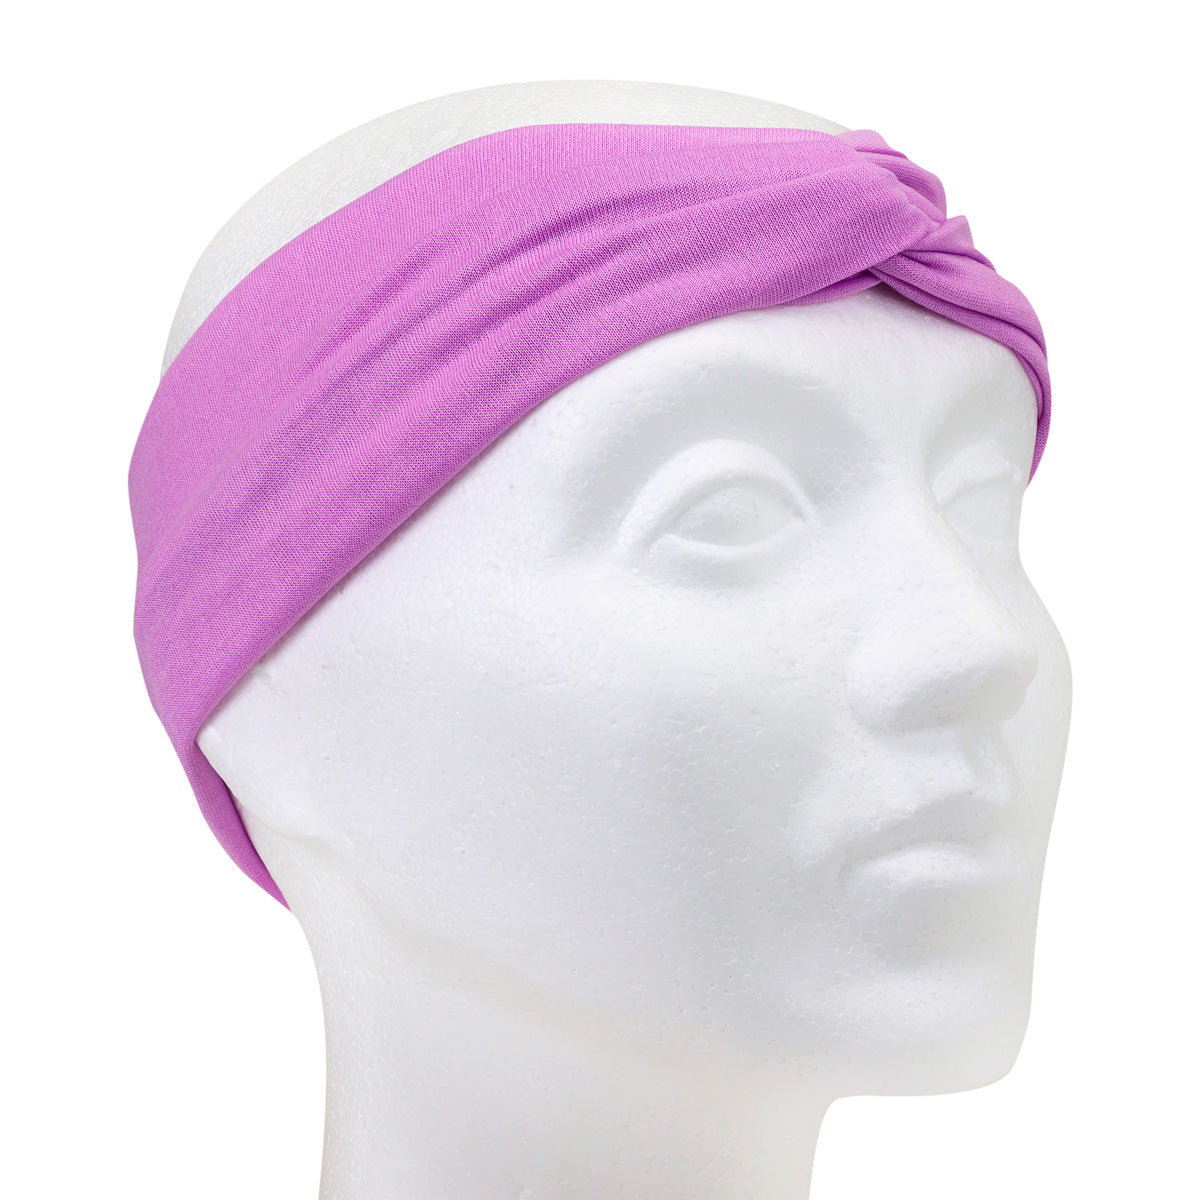 Flexible hairband with tie collar